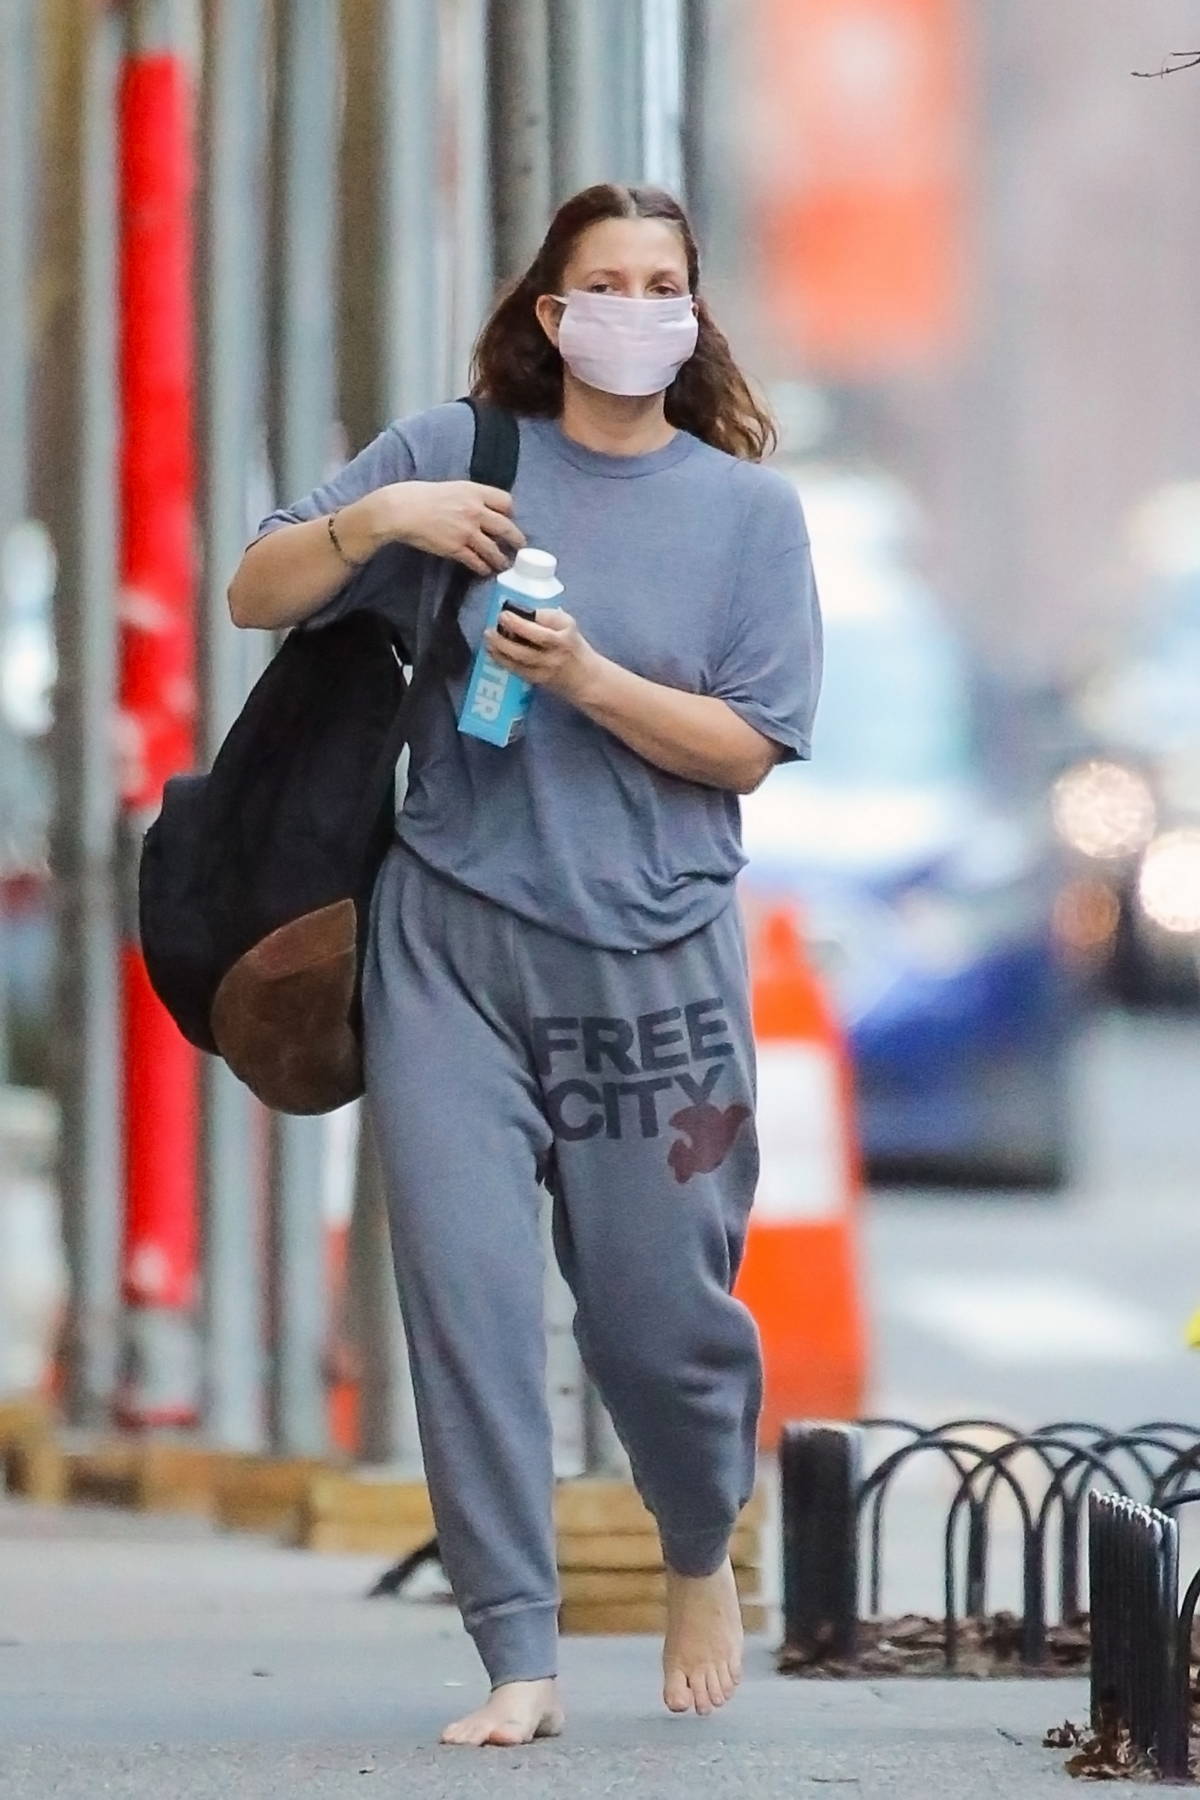 Drew Barrymore keeps things casual as she goes barefoot while out